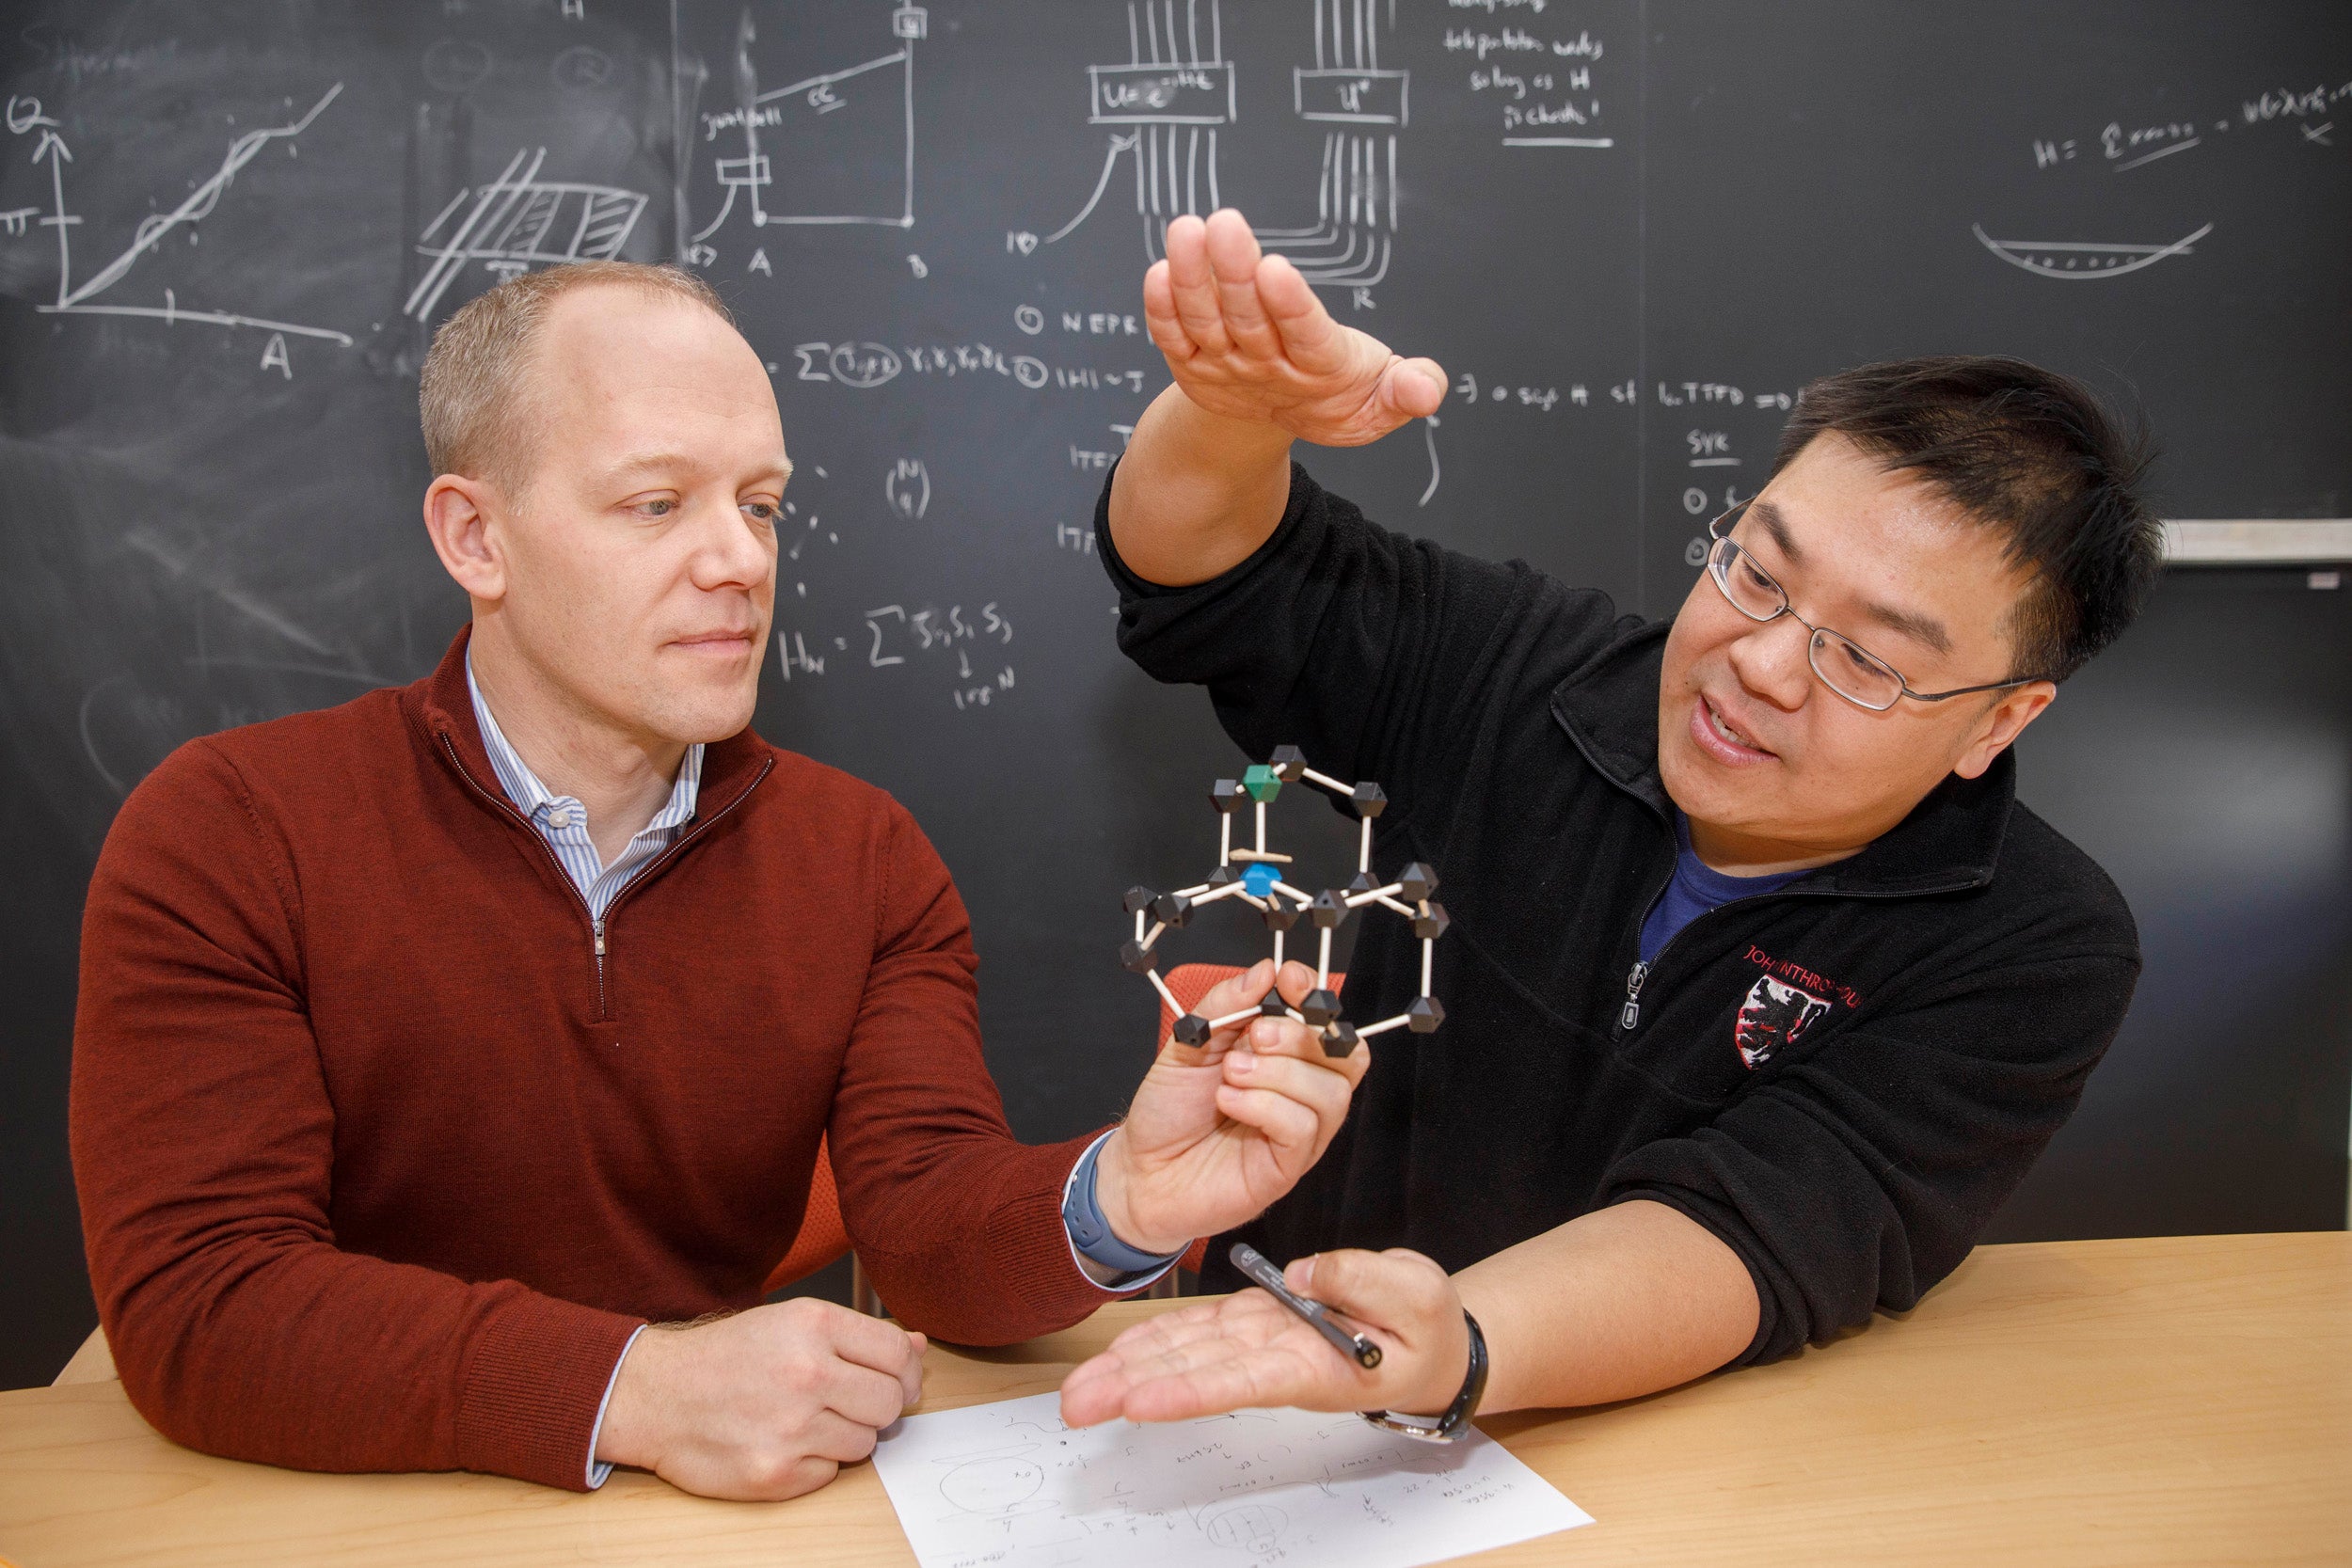 Chris Laumann and Norman Yao explain high-pressure hydride superconductor research.